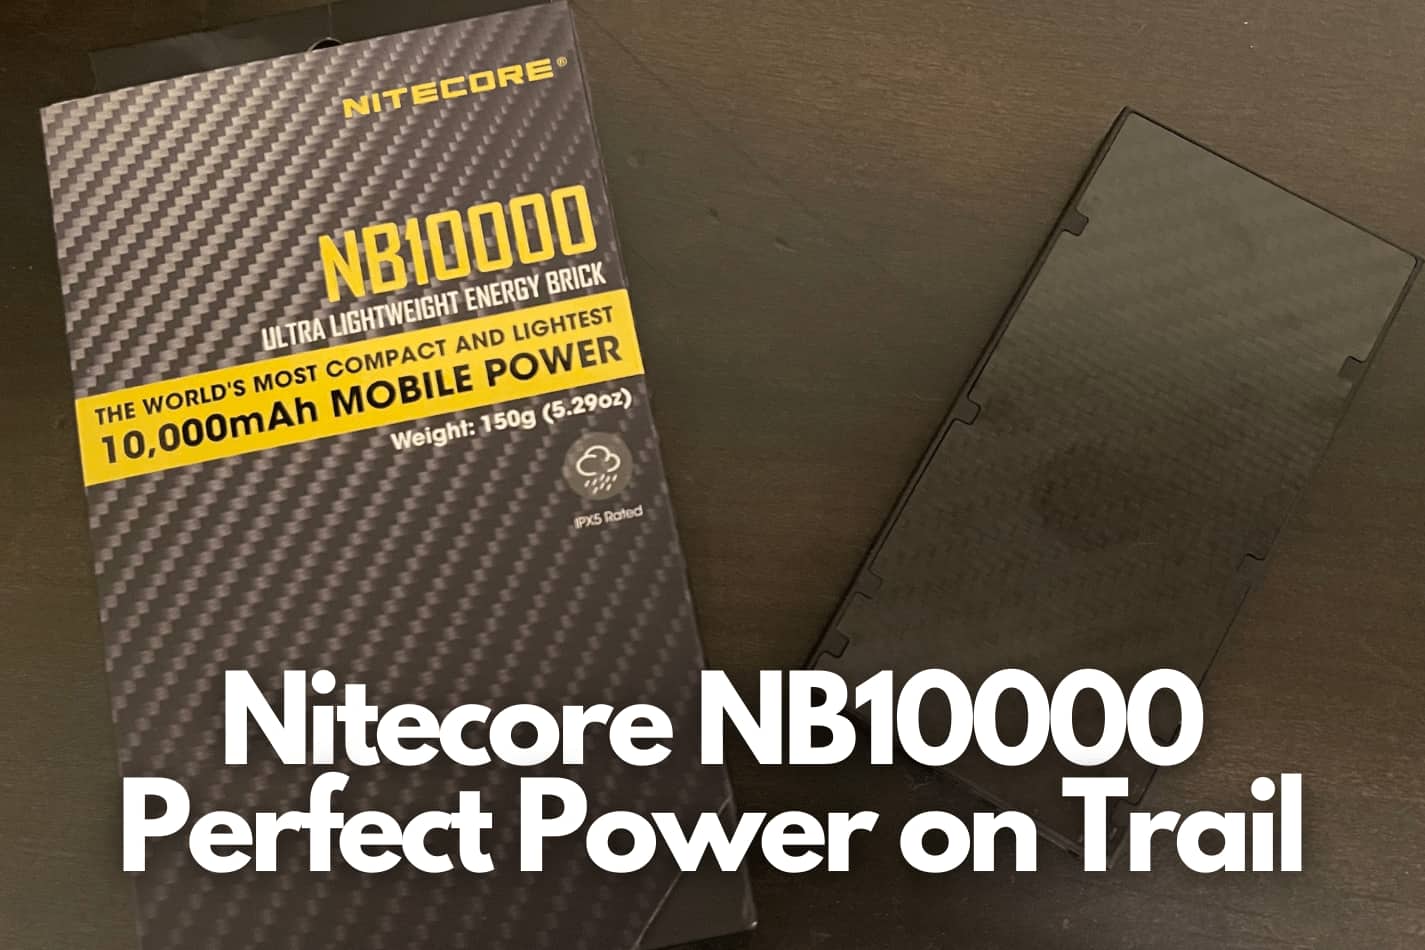 Nitecore NB1000 Review by a hiker, the nearly perfect power bank for a thru-hike